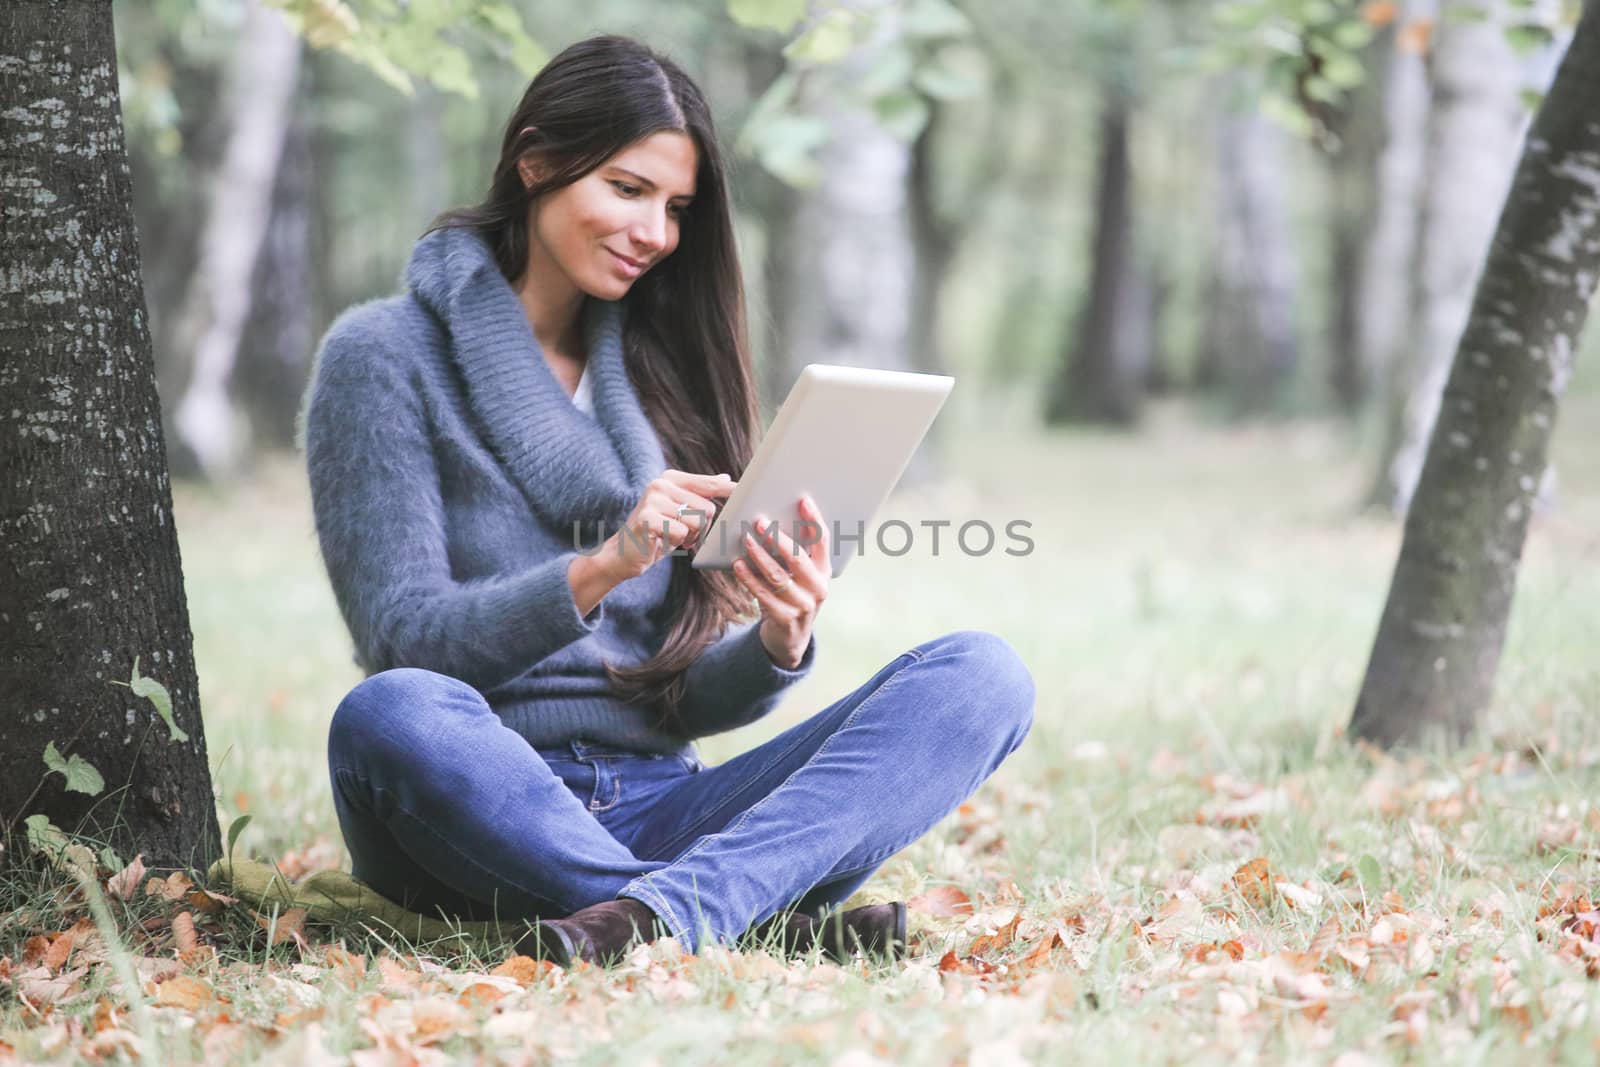 Smiling young woman using digital tablet sitting in autumn park